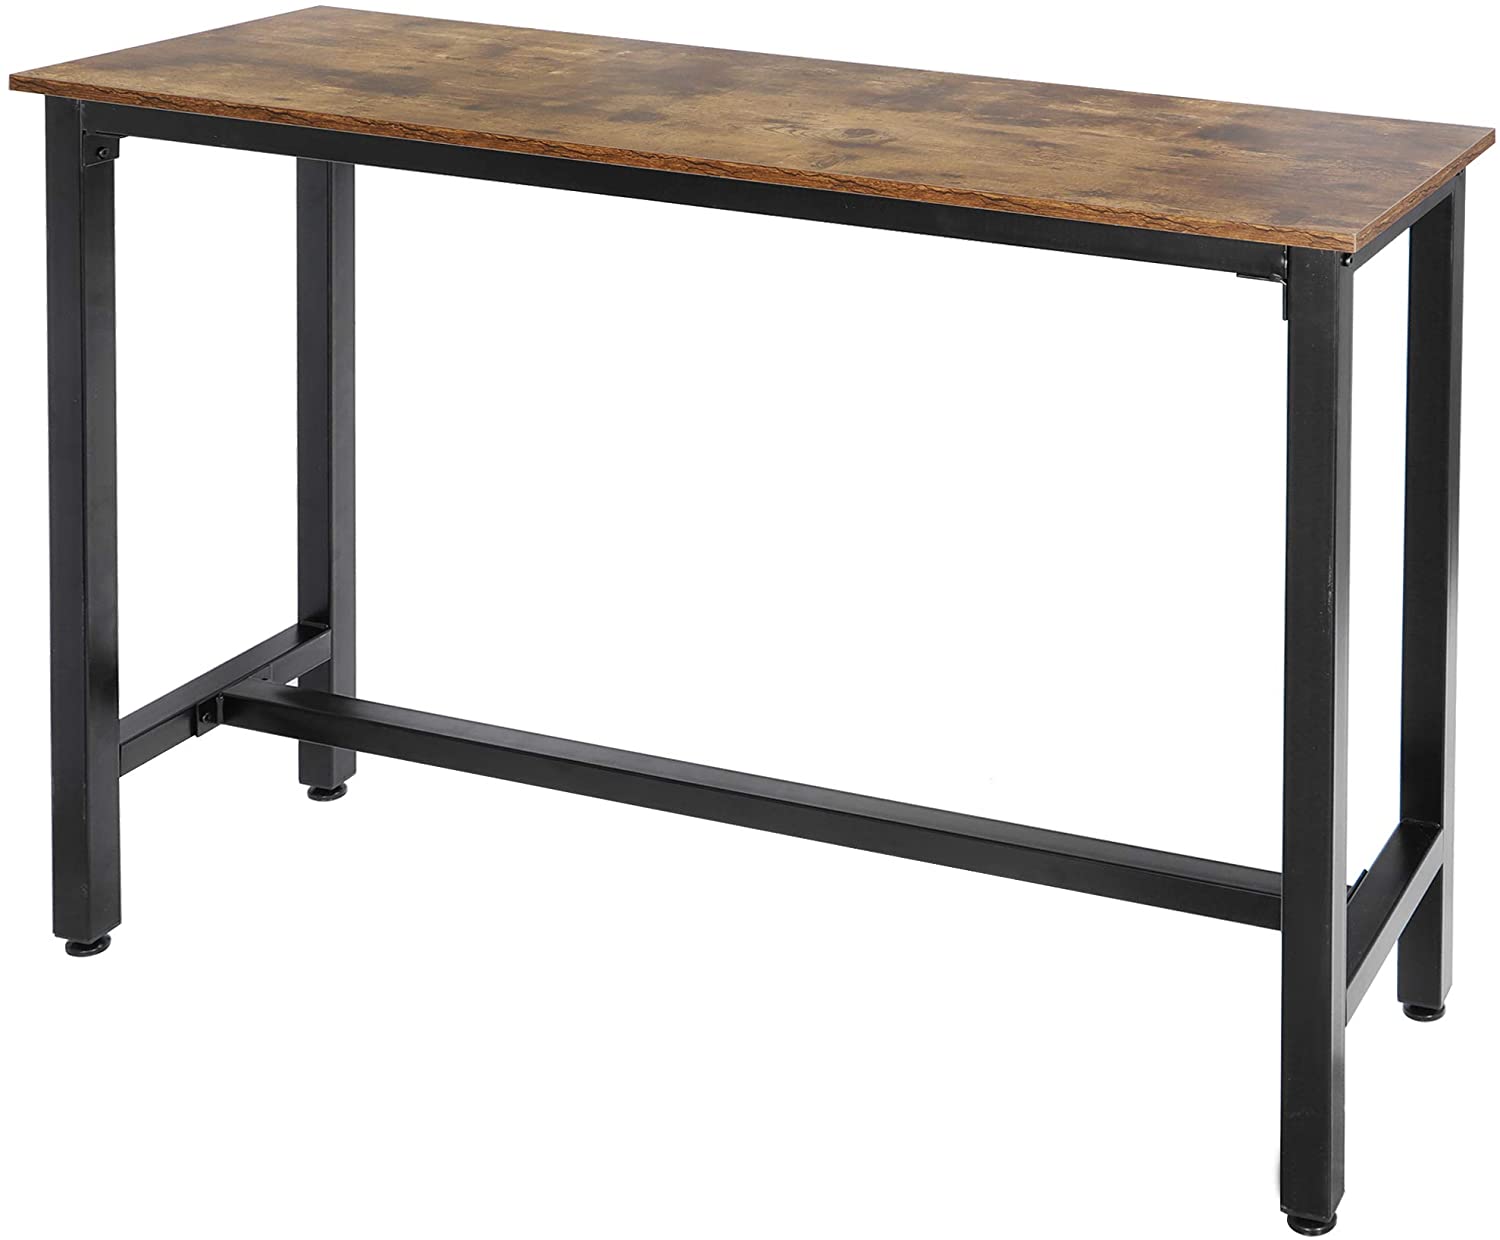 B08MTD1KTD SUPER DEAL 47.2” Rectangle Pub Bar Table - Industrial Design Narrow Dining Coffee Table with Sturdy Steel Frame Counter Height Table for Kitchen, Living Room, Dining Room